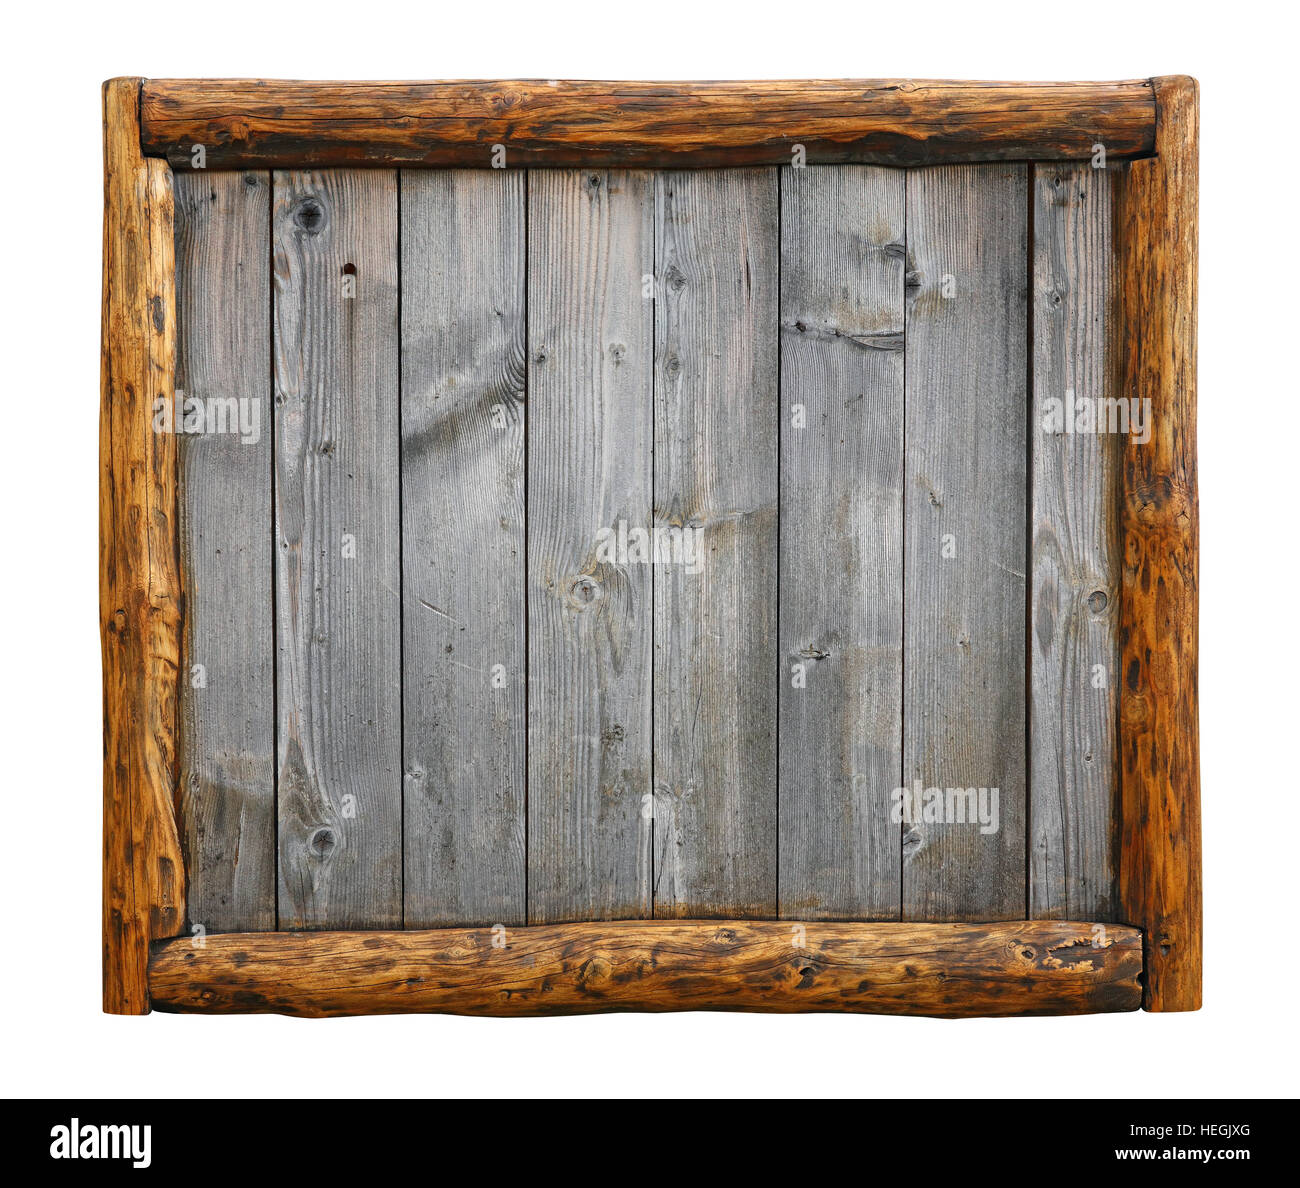 Old vintage wooden grunge gray aged rustic planks bulletin board panel with  wood log border frame, copy space in middle, isolated on white Stock Photo  - Alamy